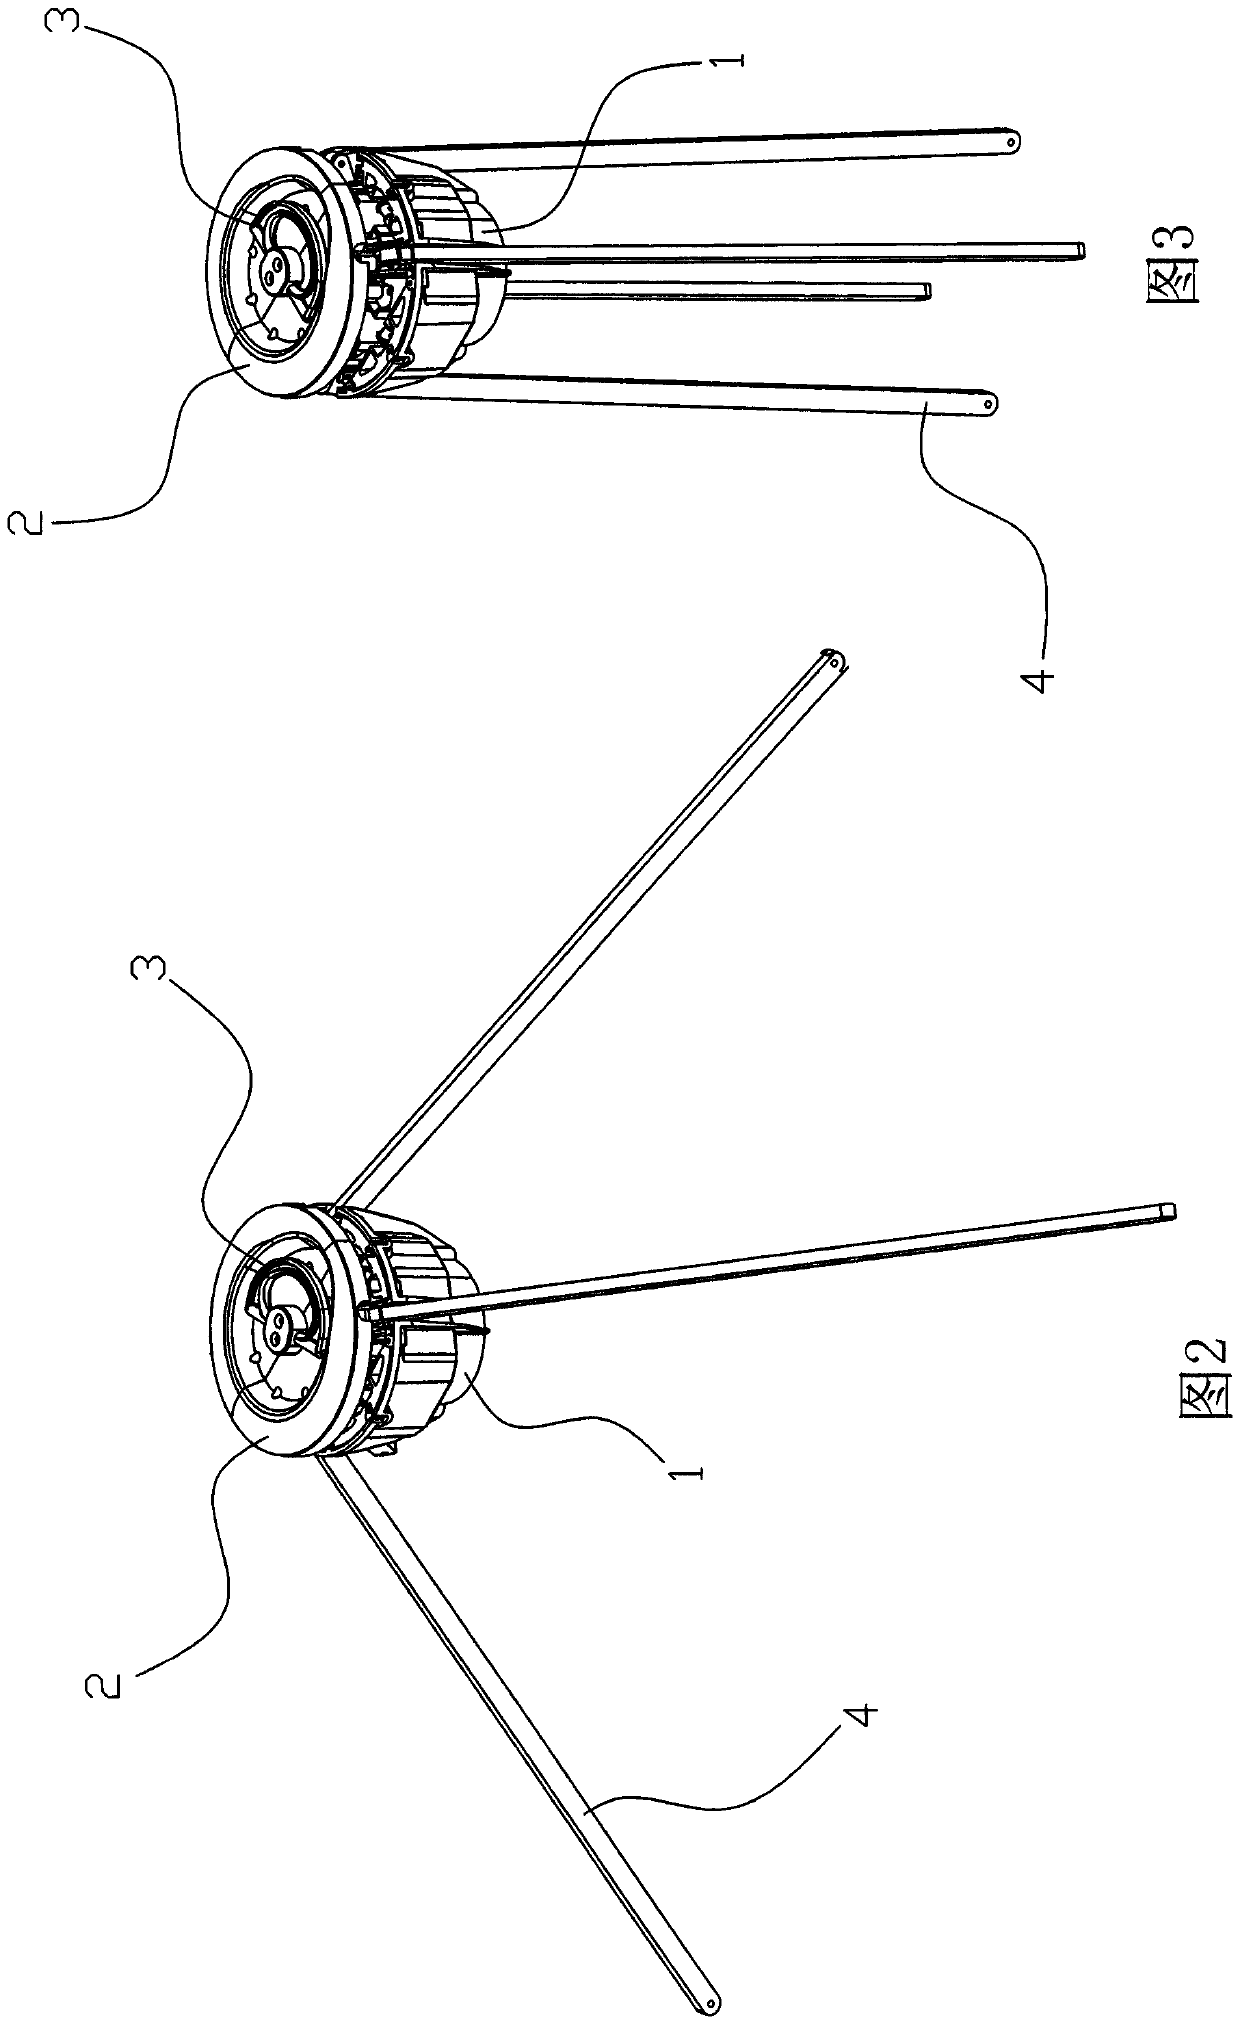 A locking and unlocking device for a central controller of a folding bed